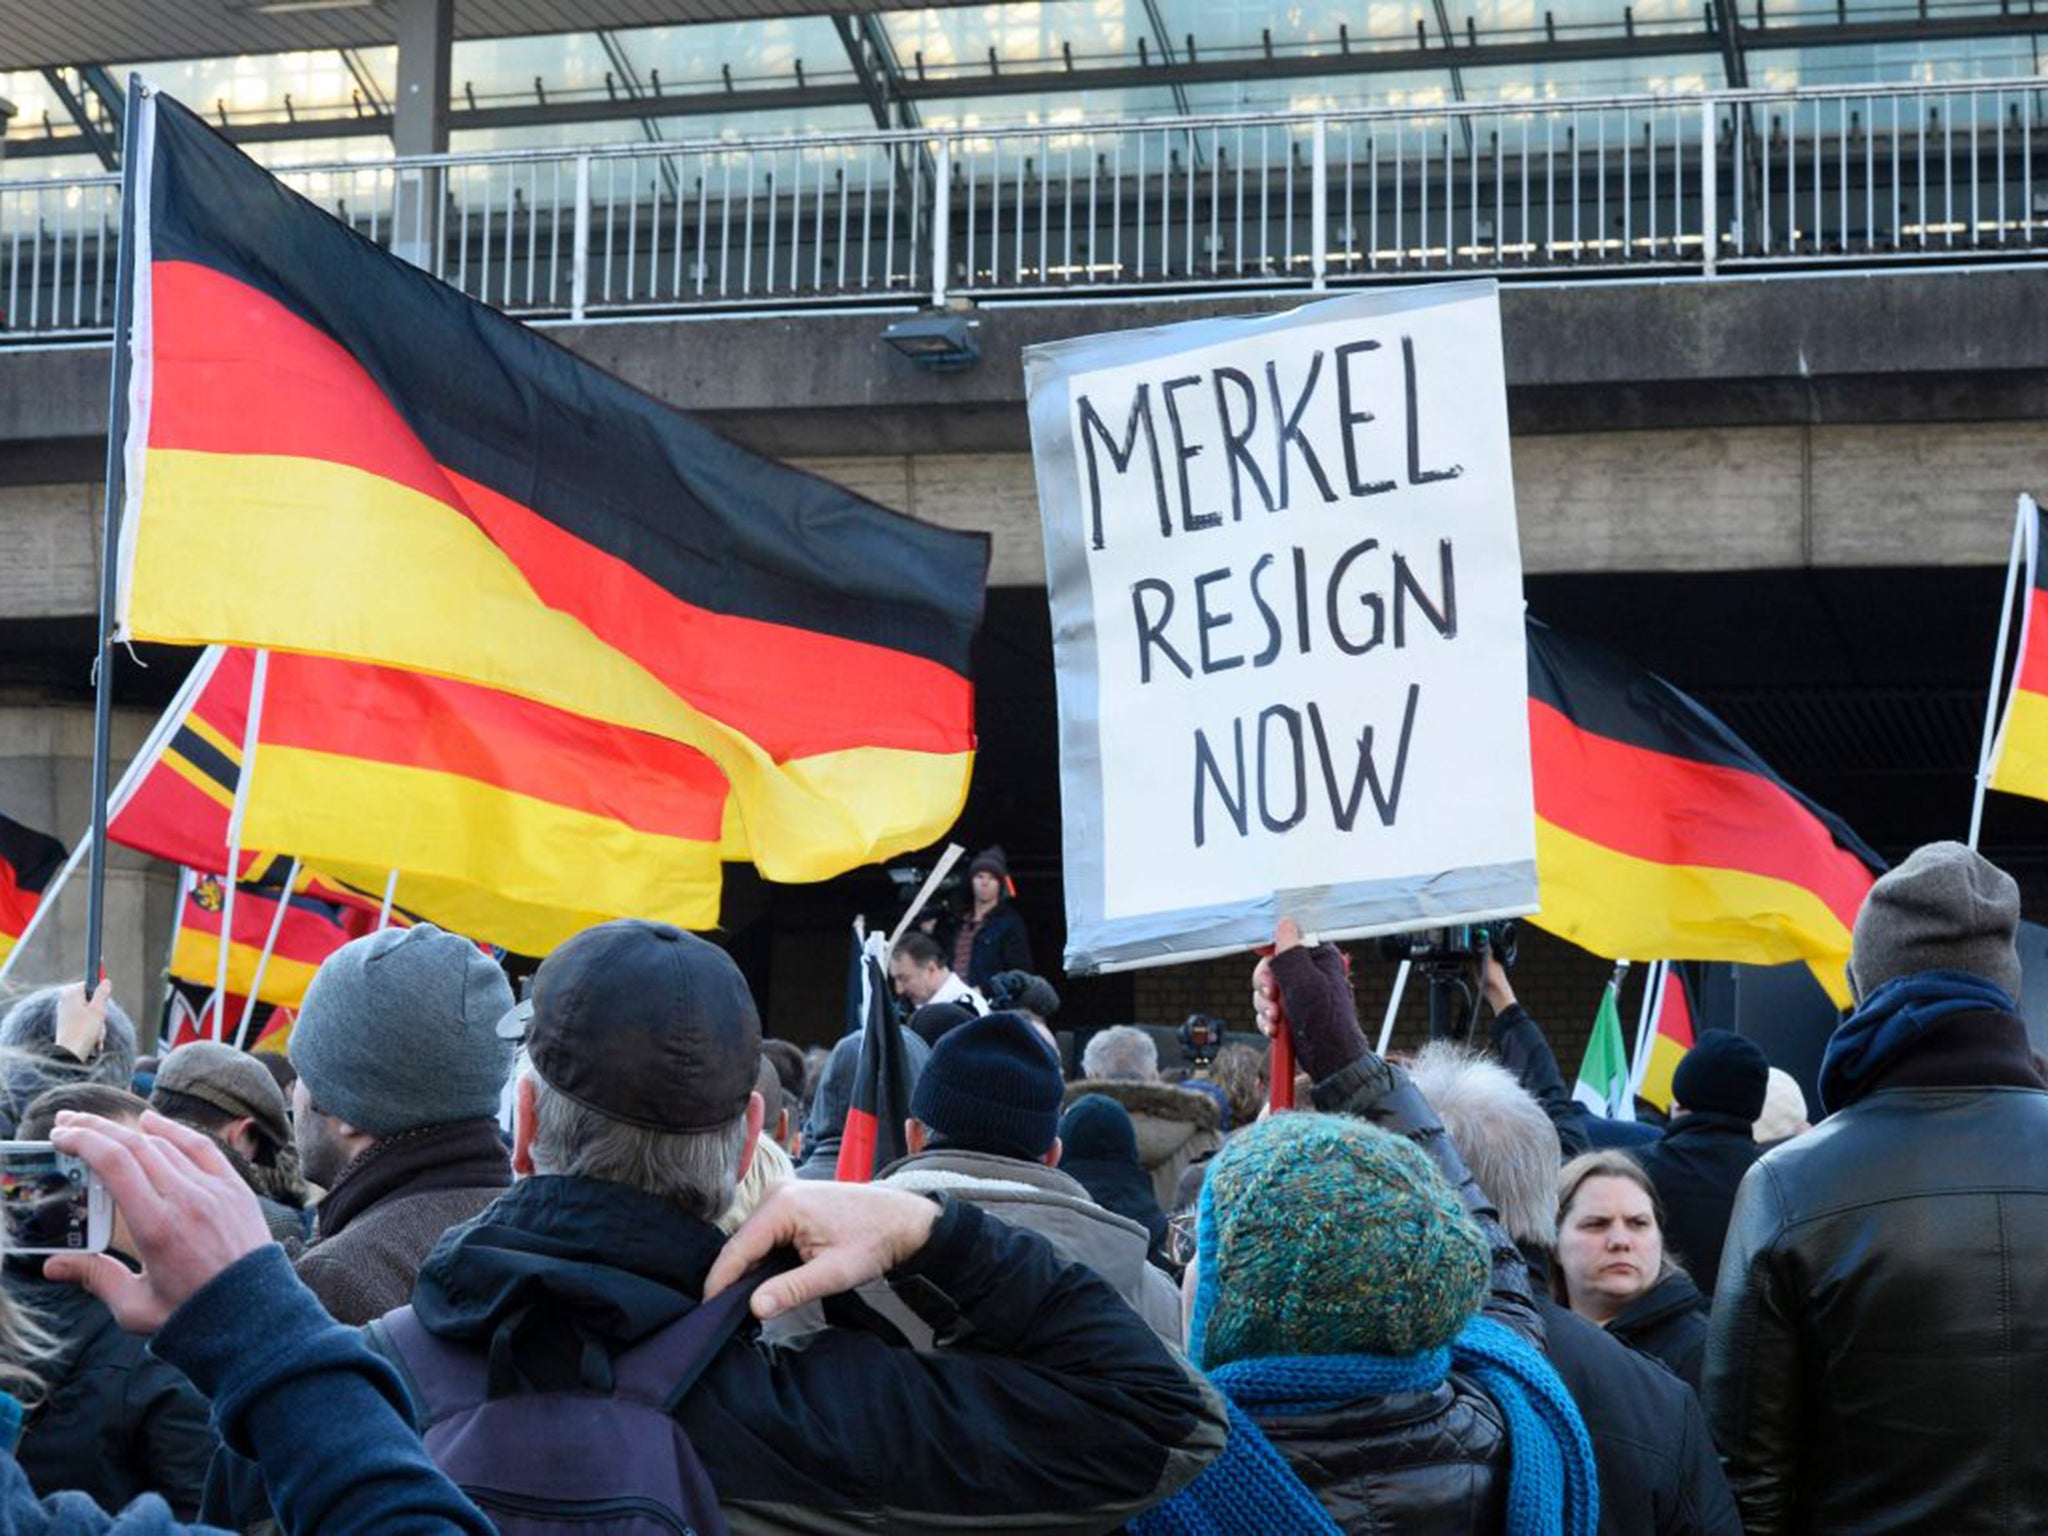 German far-right protesters at Cologne’s main train station at the weekend